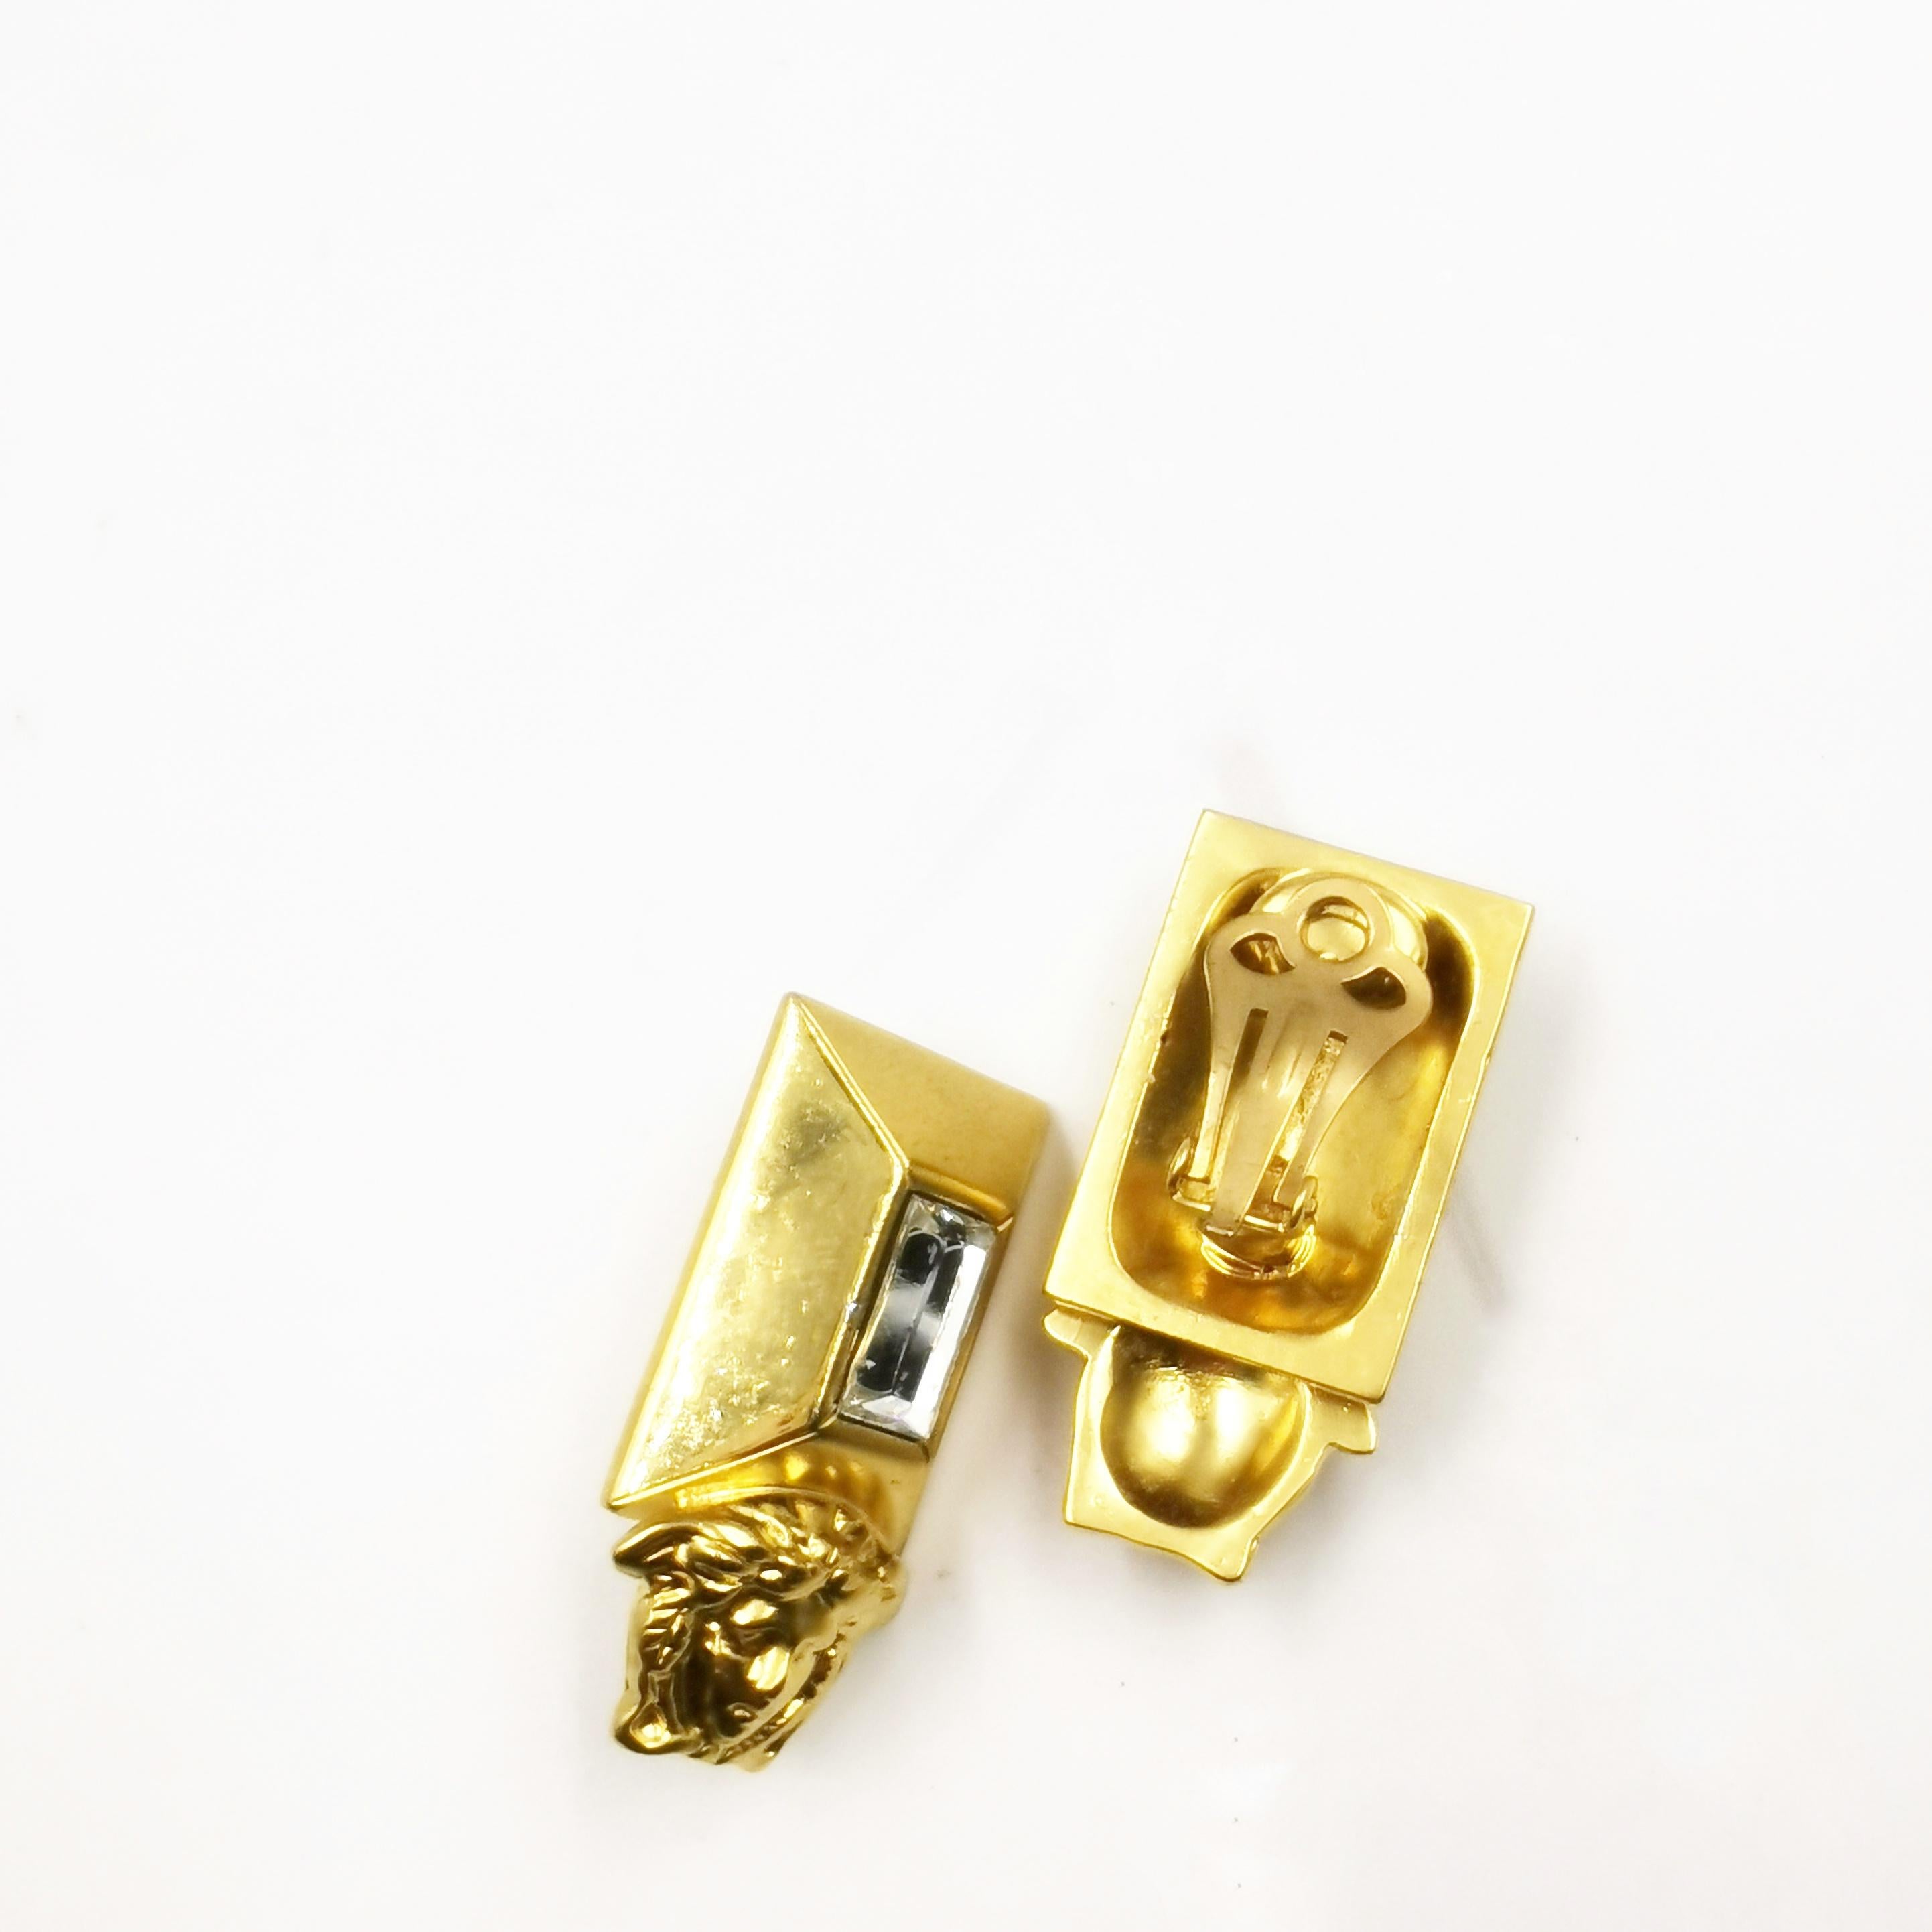 Step into the glamorous world of the 1990s with the breathtaking Gianni Versace Vintage Gold Medusa Emerald Cut Crystal Clip On Earrings. These stunning earrings capture the essence of Versace's iconic aesthetic, showcasing a perfect blend of